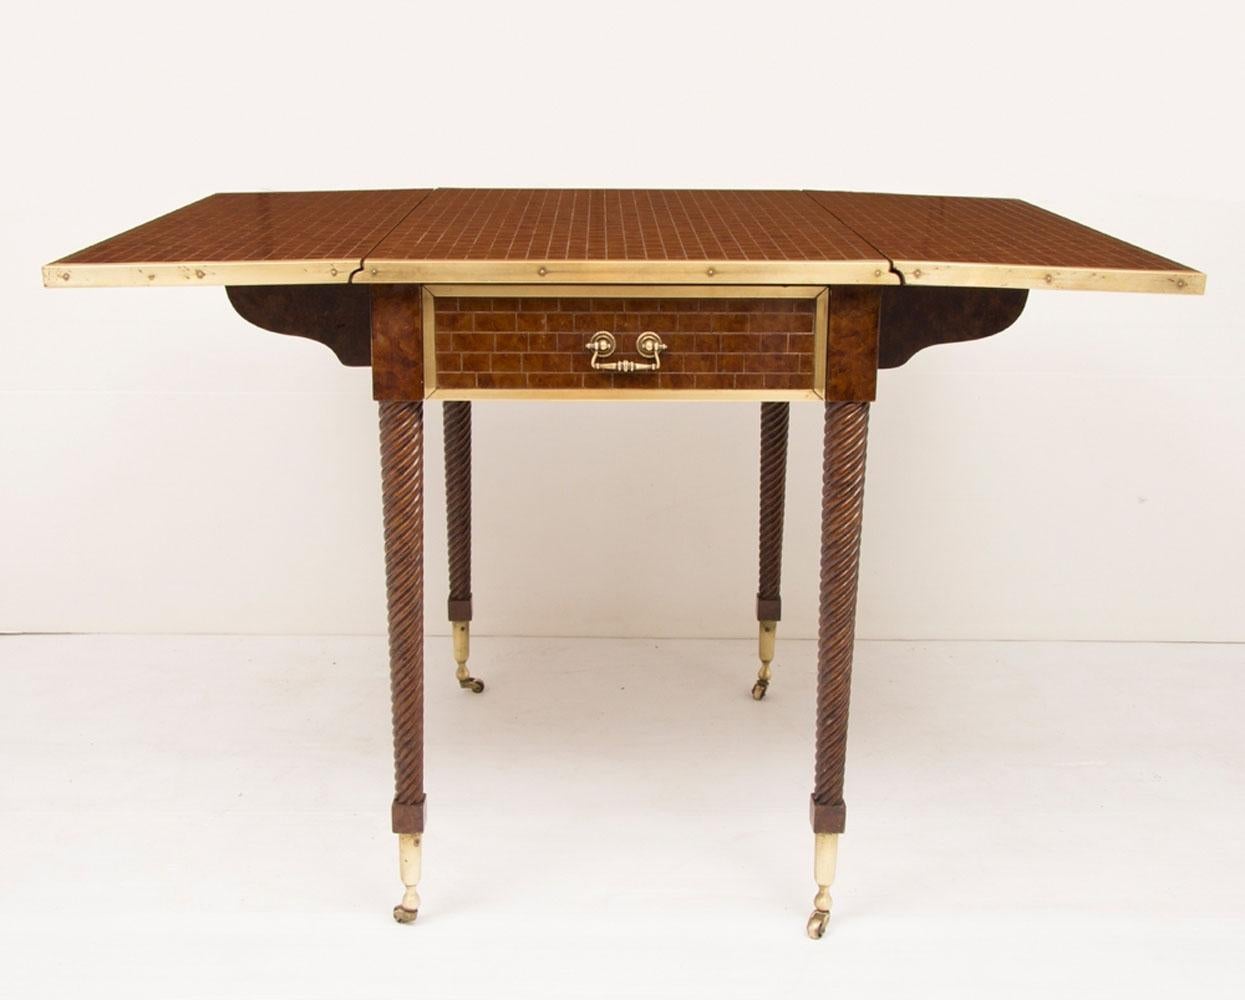 Polished American Extending Table by John Widdicomb